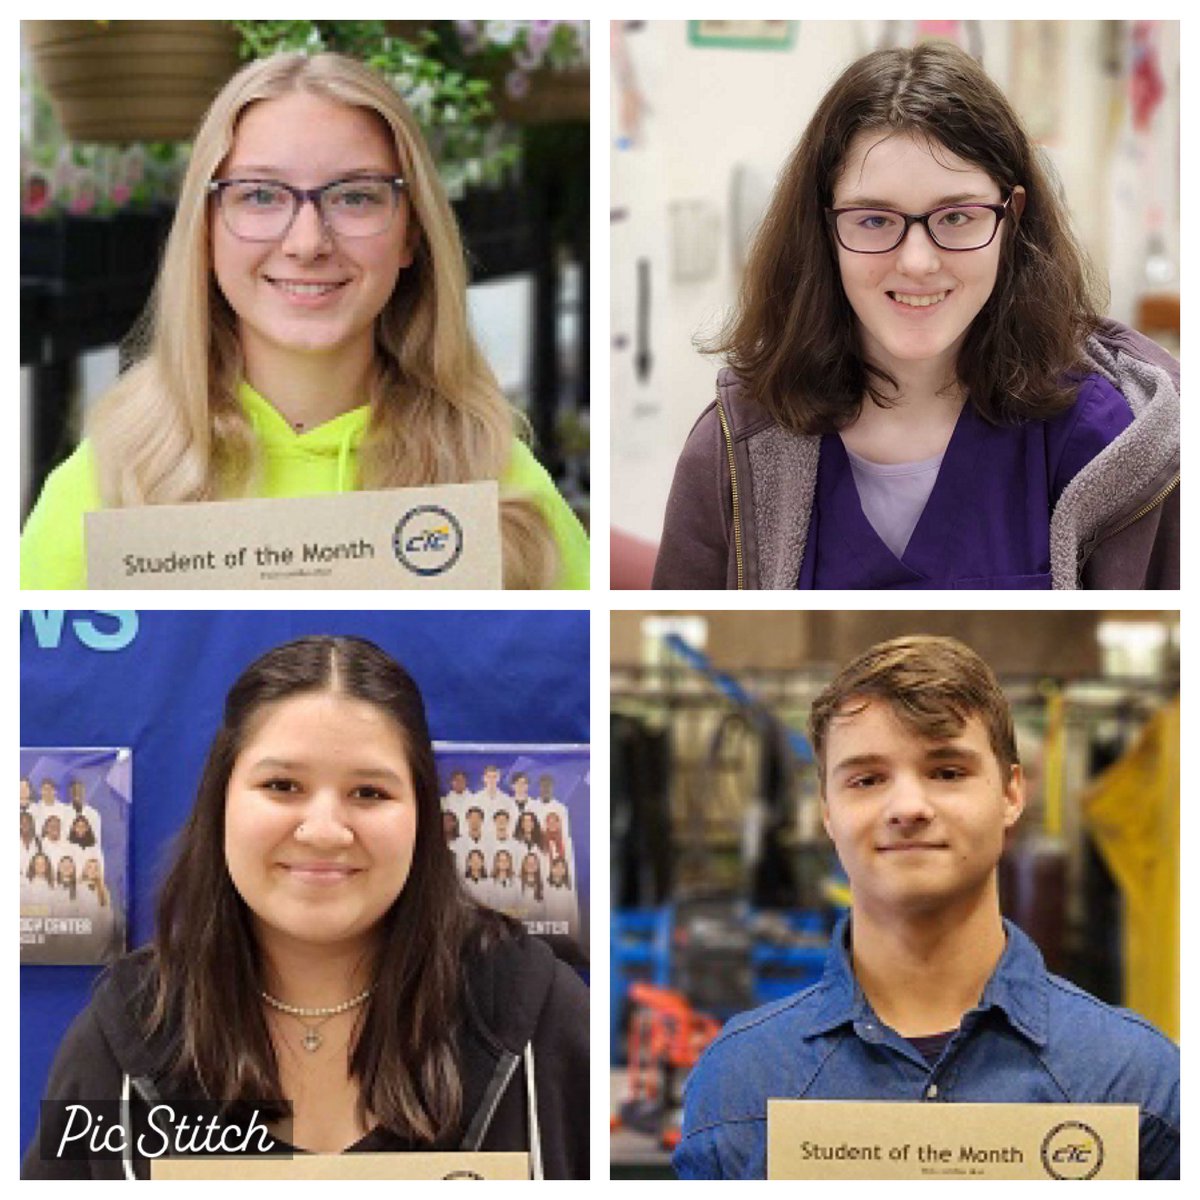 Congrats to our latest @FrederickCTC Students of the Month: Chloe (CTA), Andrew (Crim 1), Micayla (Landsc), Emma (AoHP1), Paul (Carp2), Riley (Cosmo2), Lilian (BioMd1) & Jacob (Weld2)! @CTCBiomed @AohpCtc @Landscape_CTC @CtcJustice @CTEKPearl